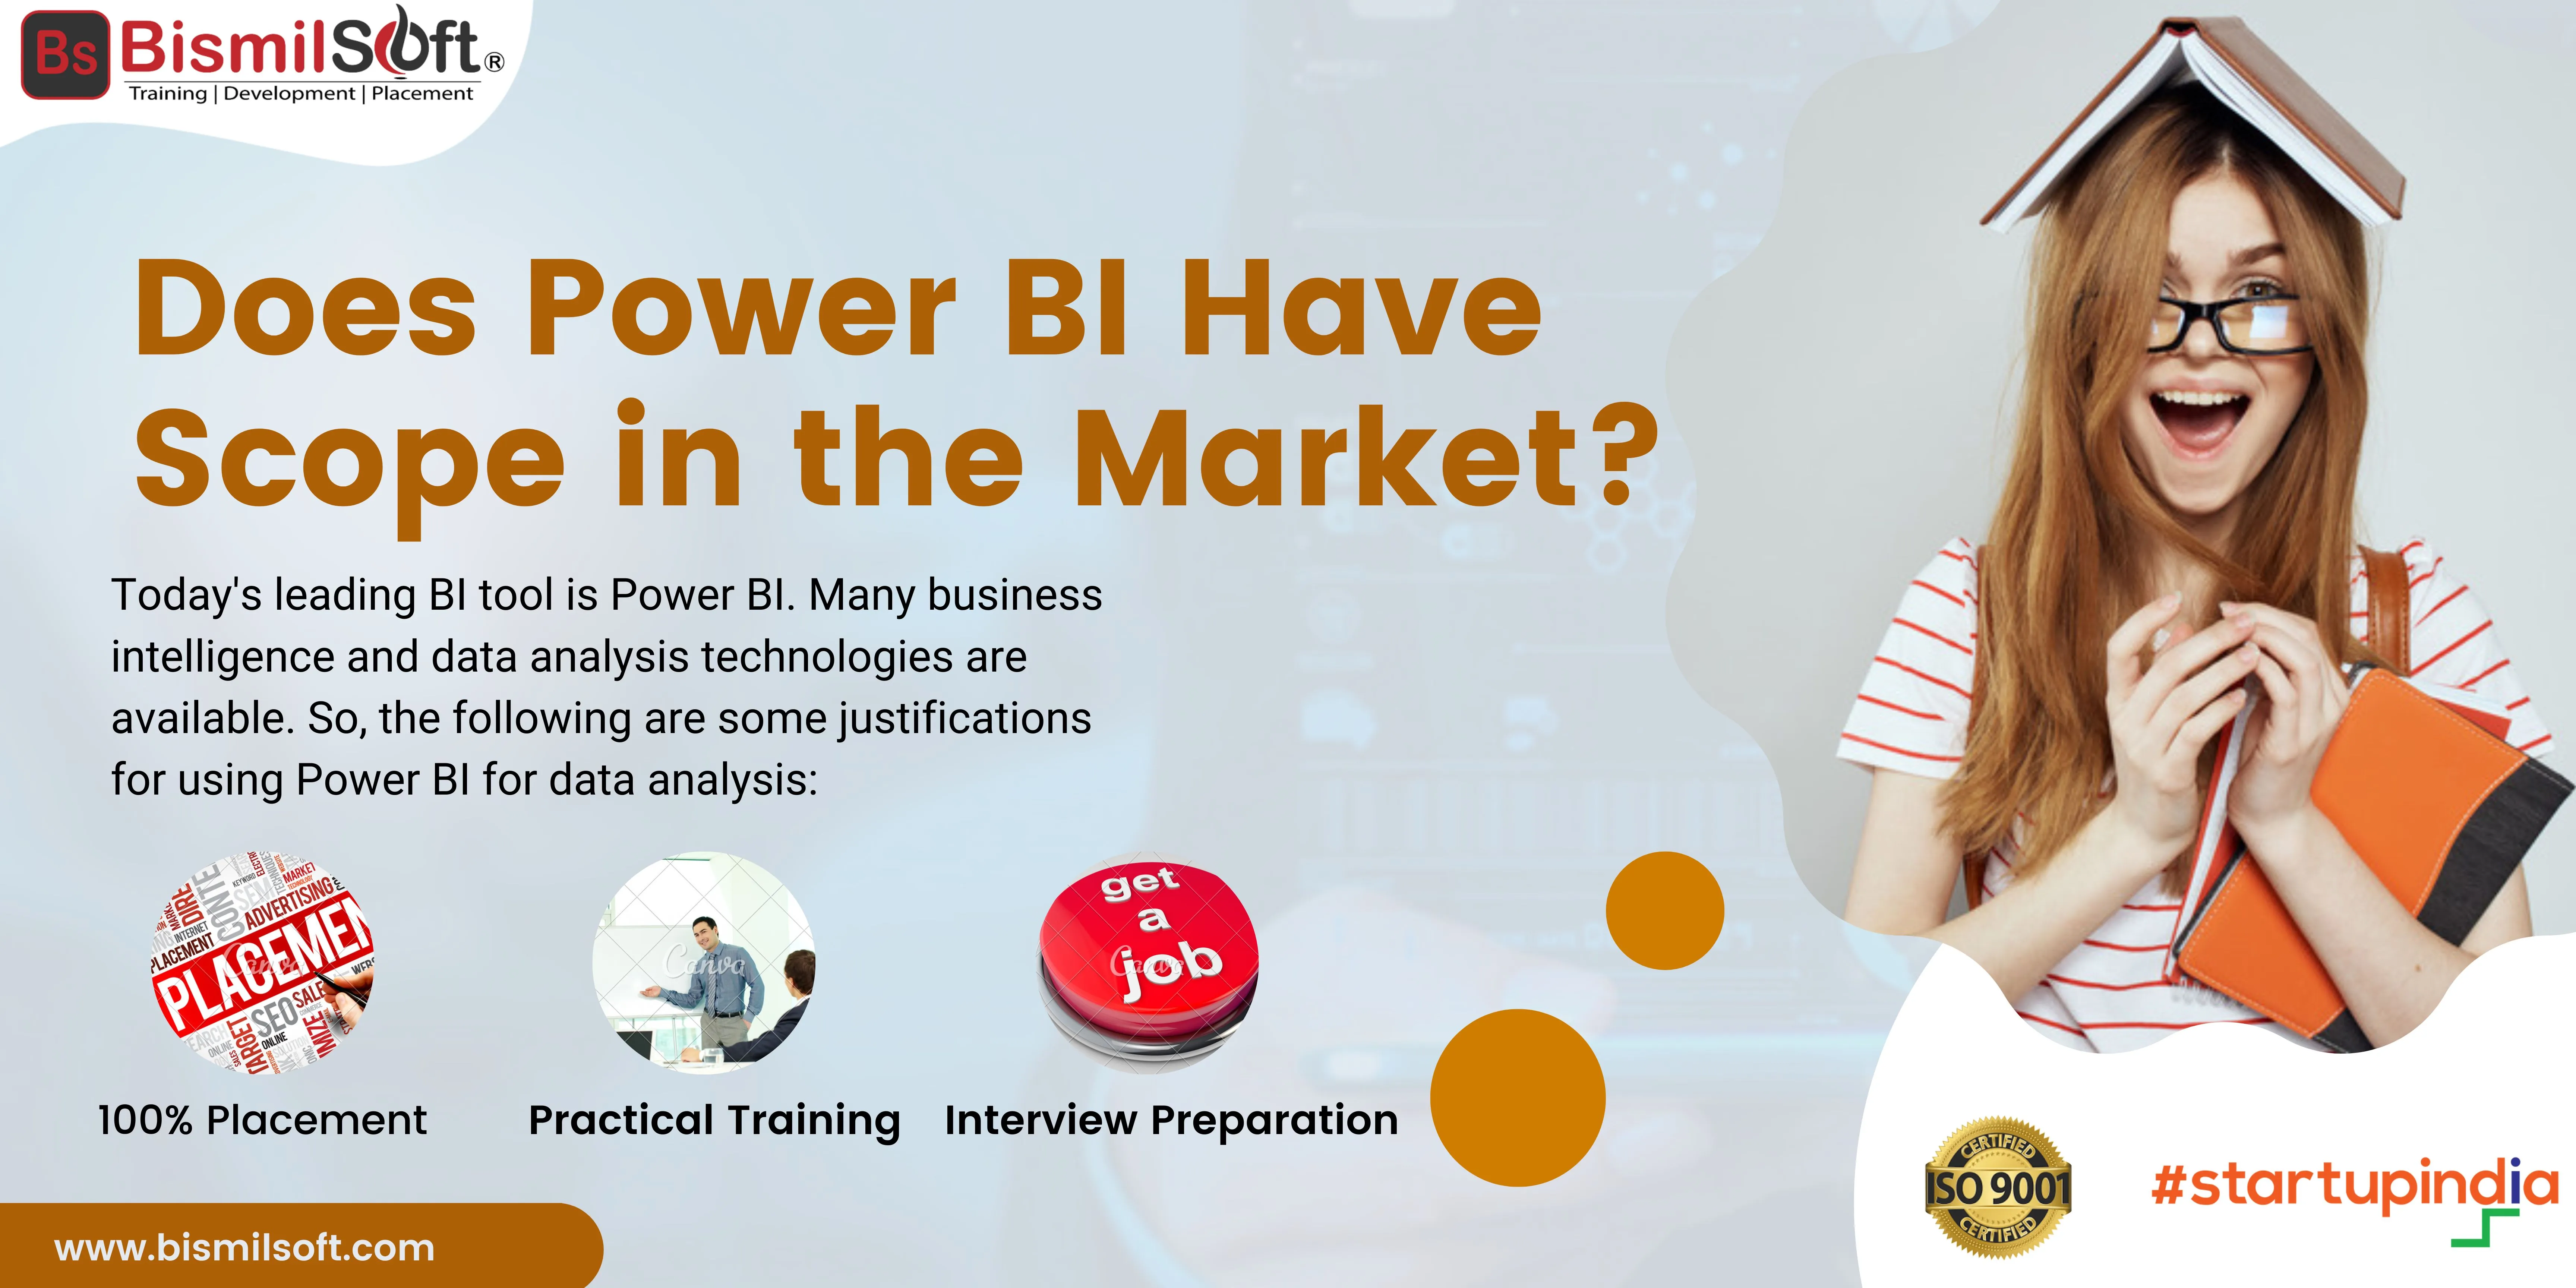 Does Power BI Have Scope in the Market